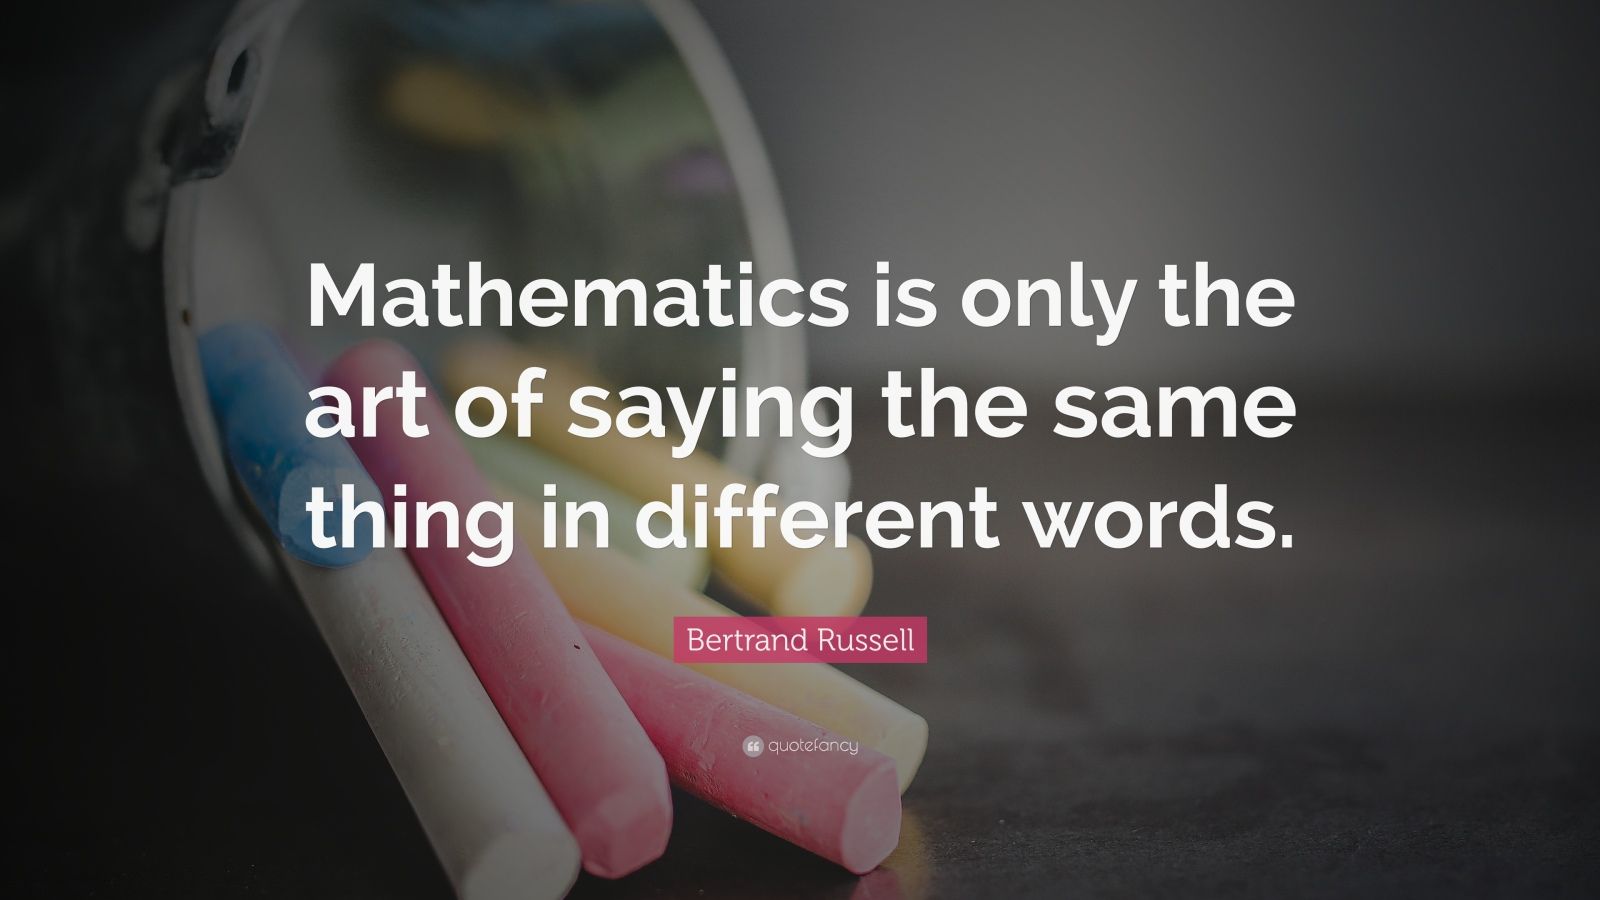 bertrand-russell-quote-mathematics-is-only-the-art-of-saying-the-same-thing-in-different-words